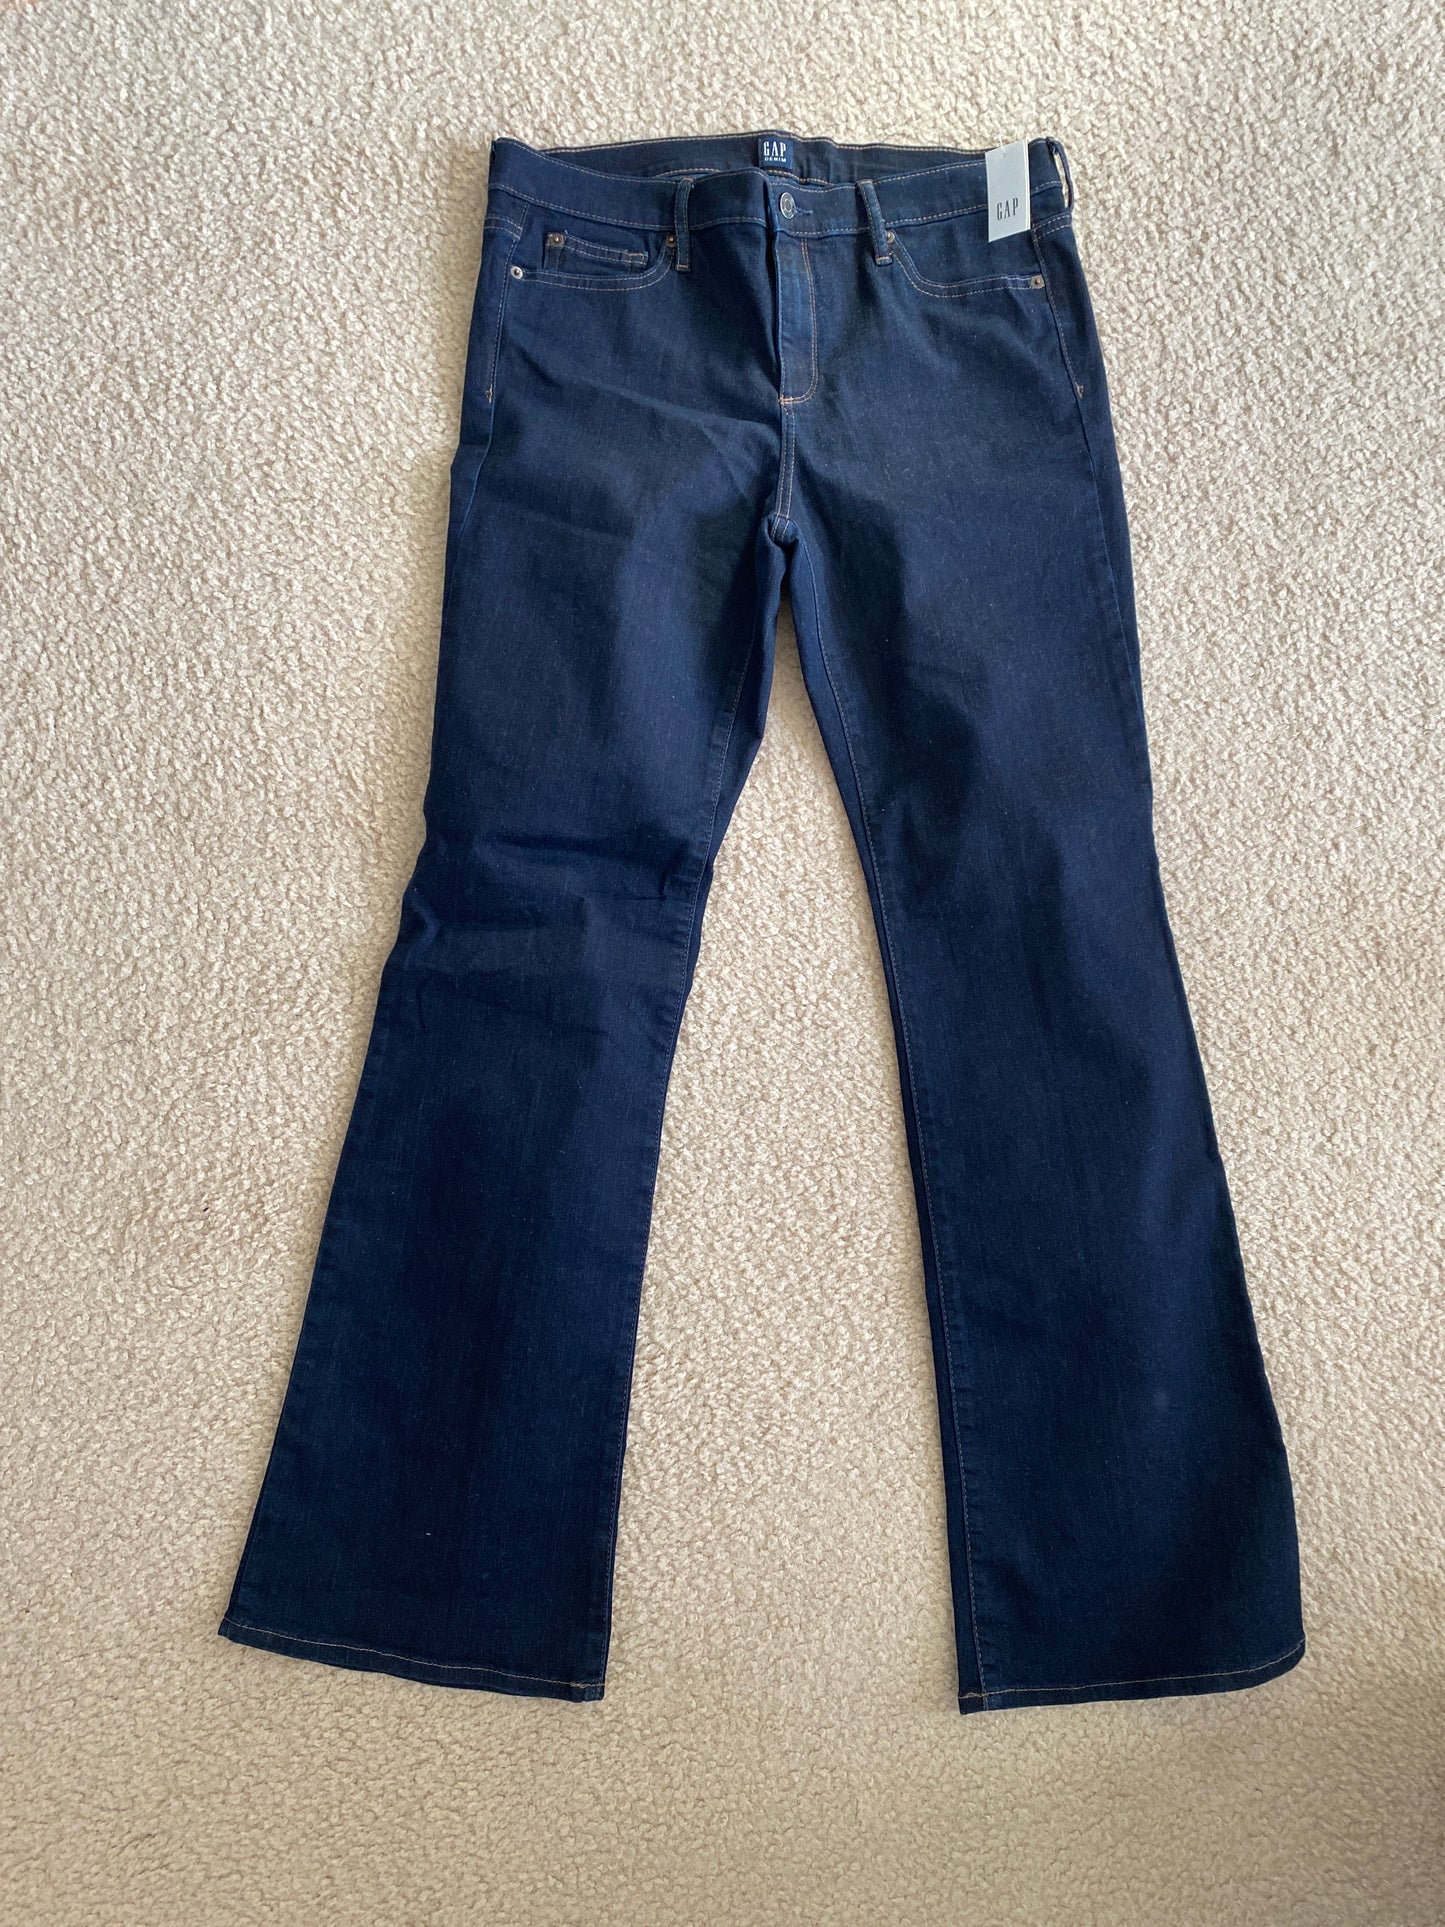 GAP women’s perfect boot jeans 32R NWT